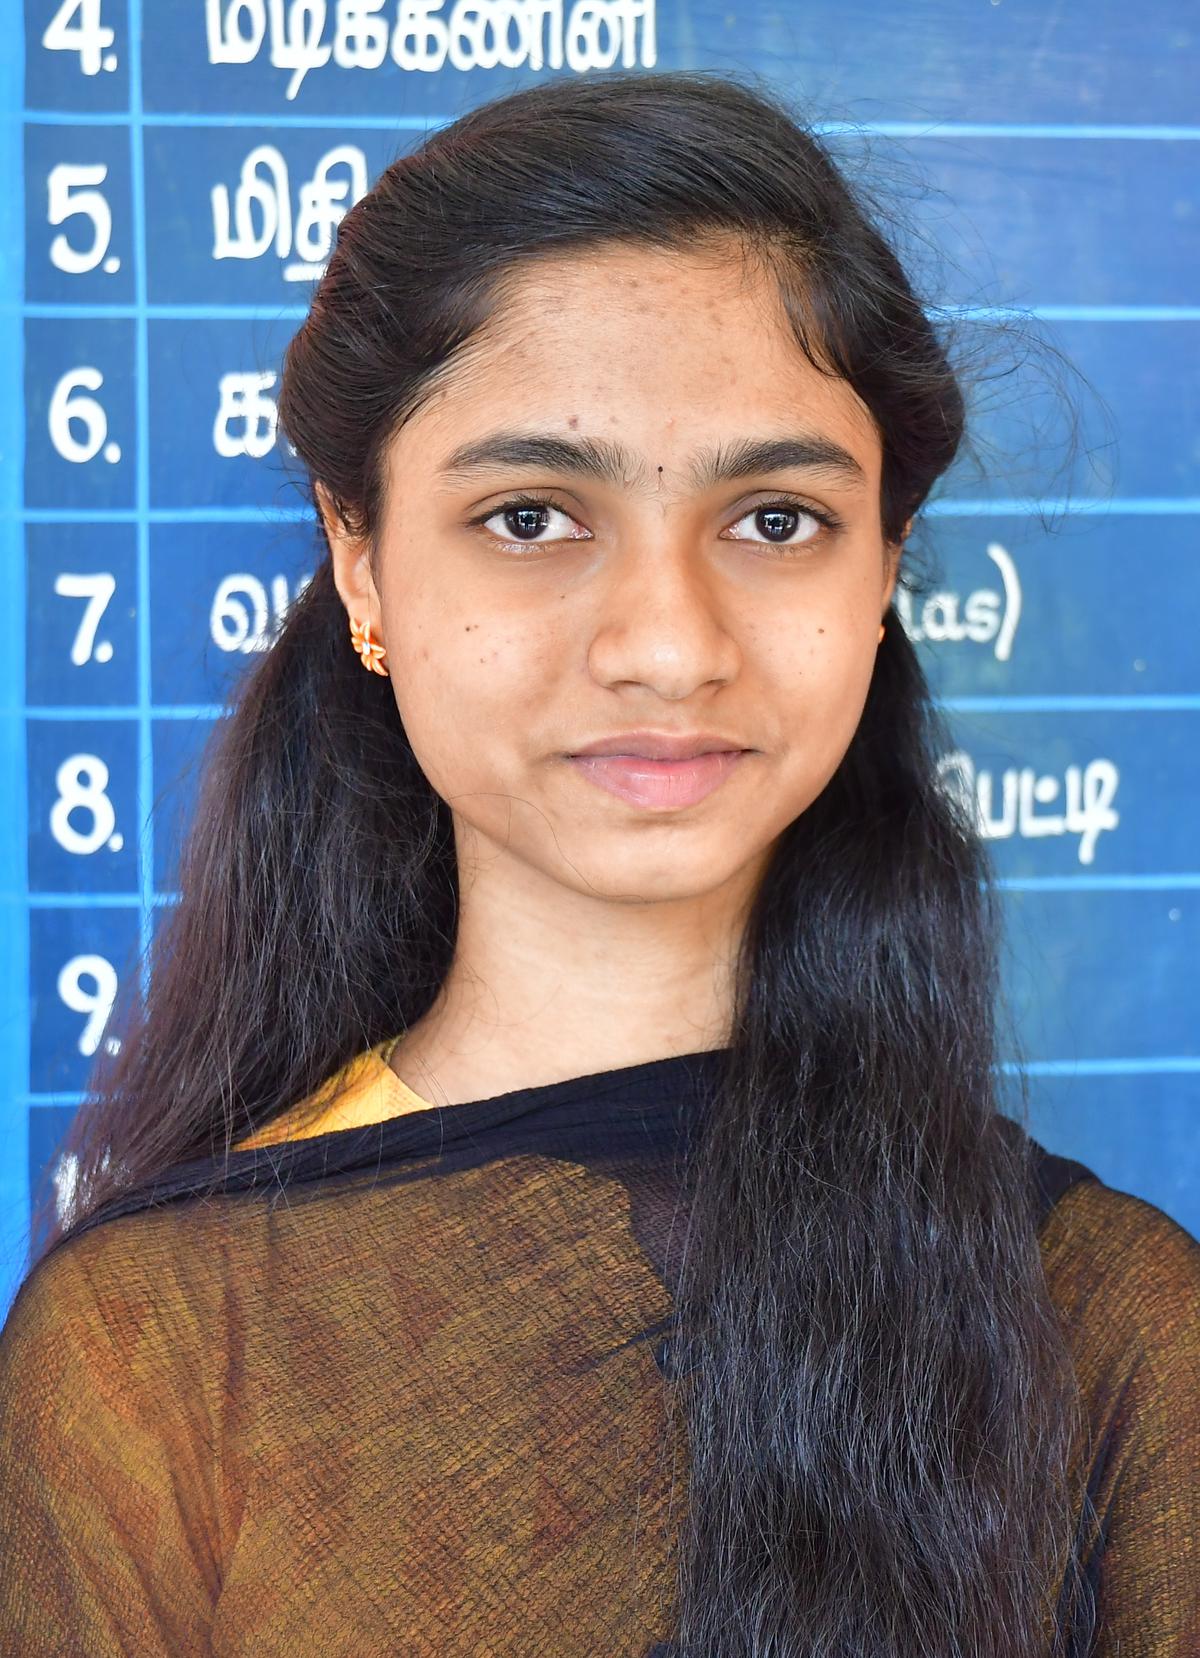 T.N. Class 12 results | Daughter of daily-wage labourer in Dindigul scores 600/600 - The Hindu